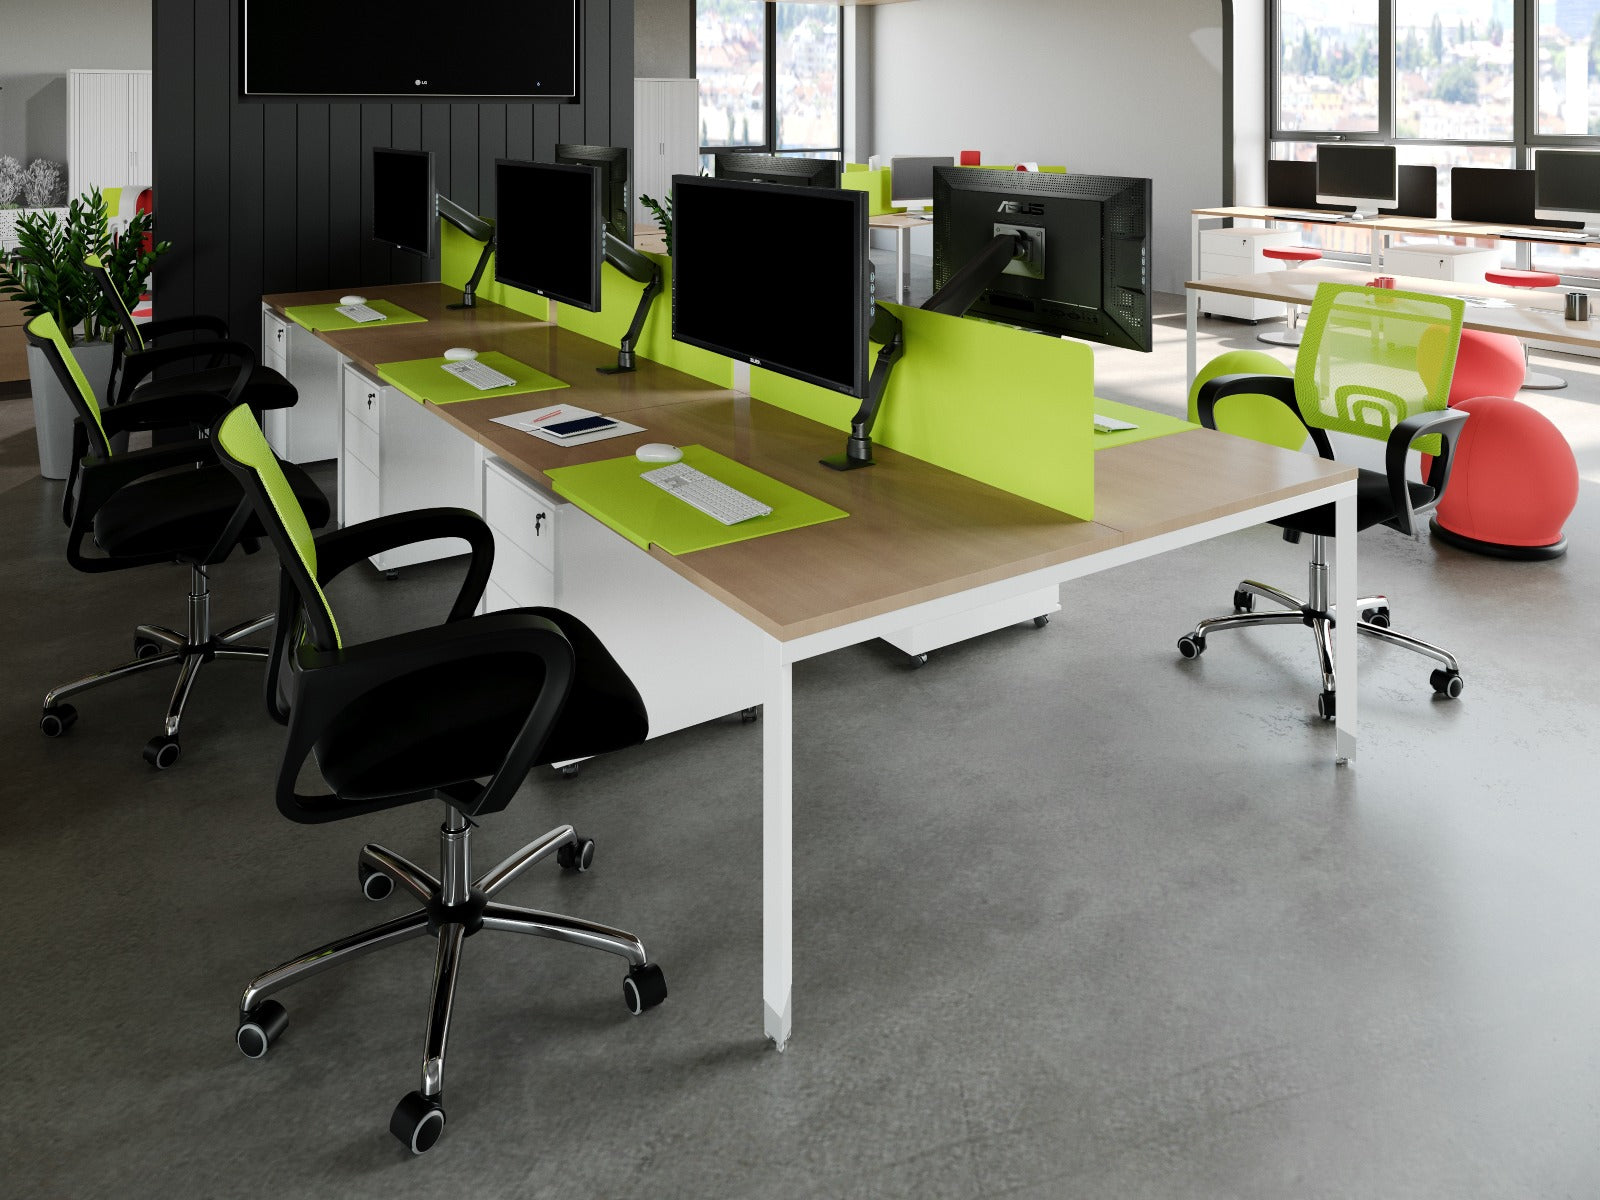 How to build an ergonomic office space using ergonomic office